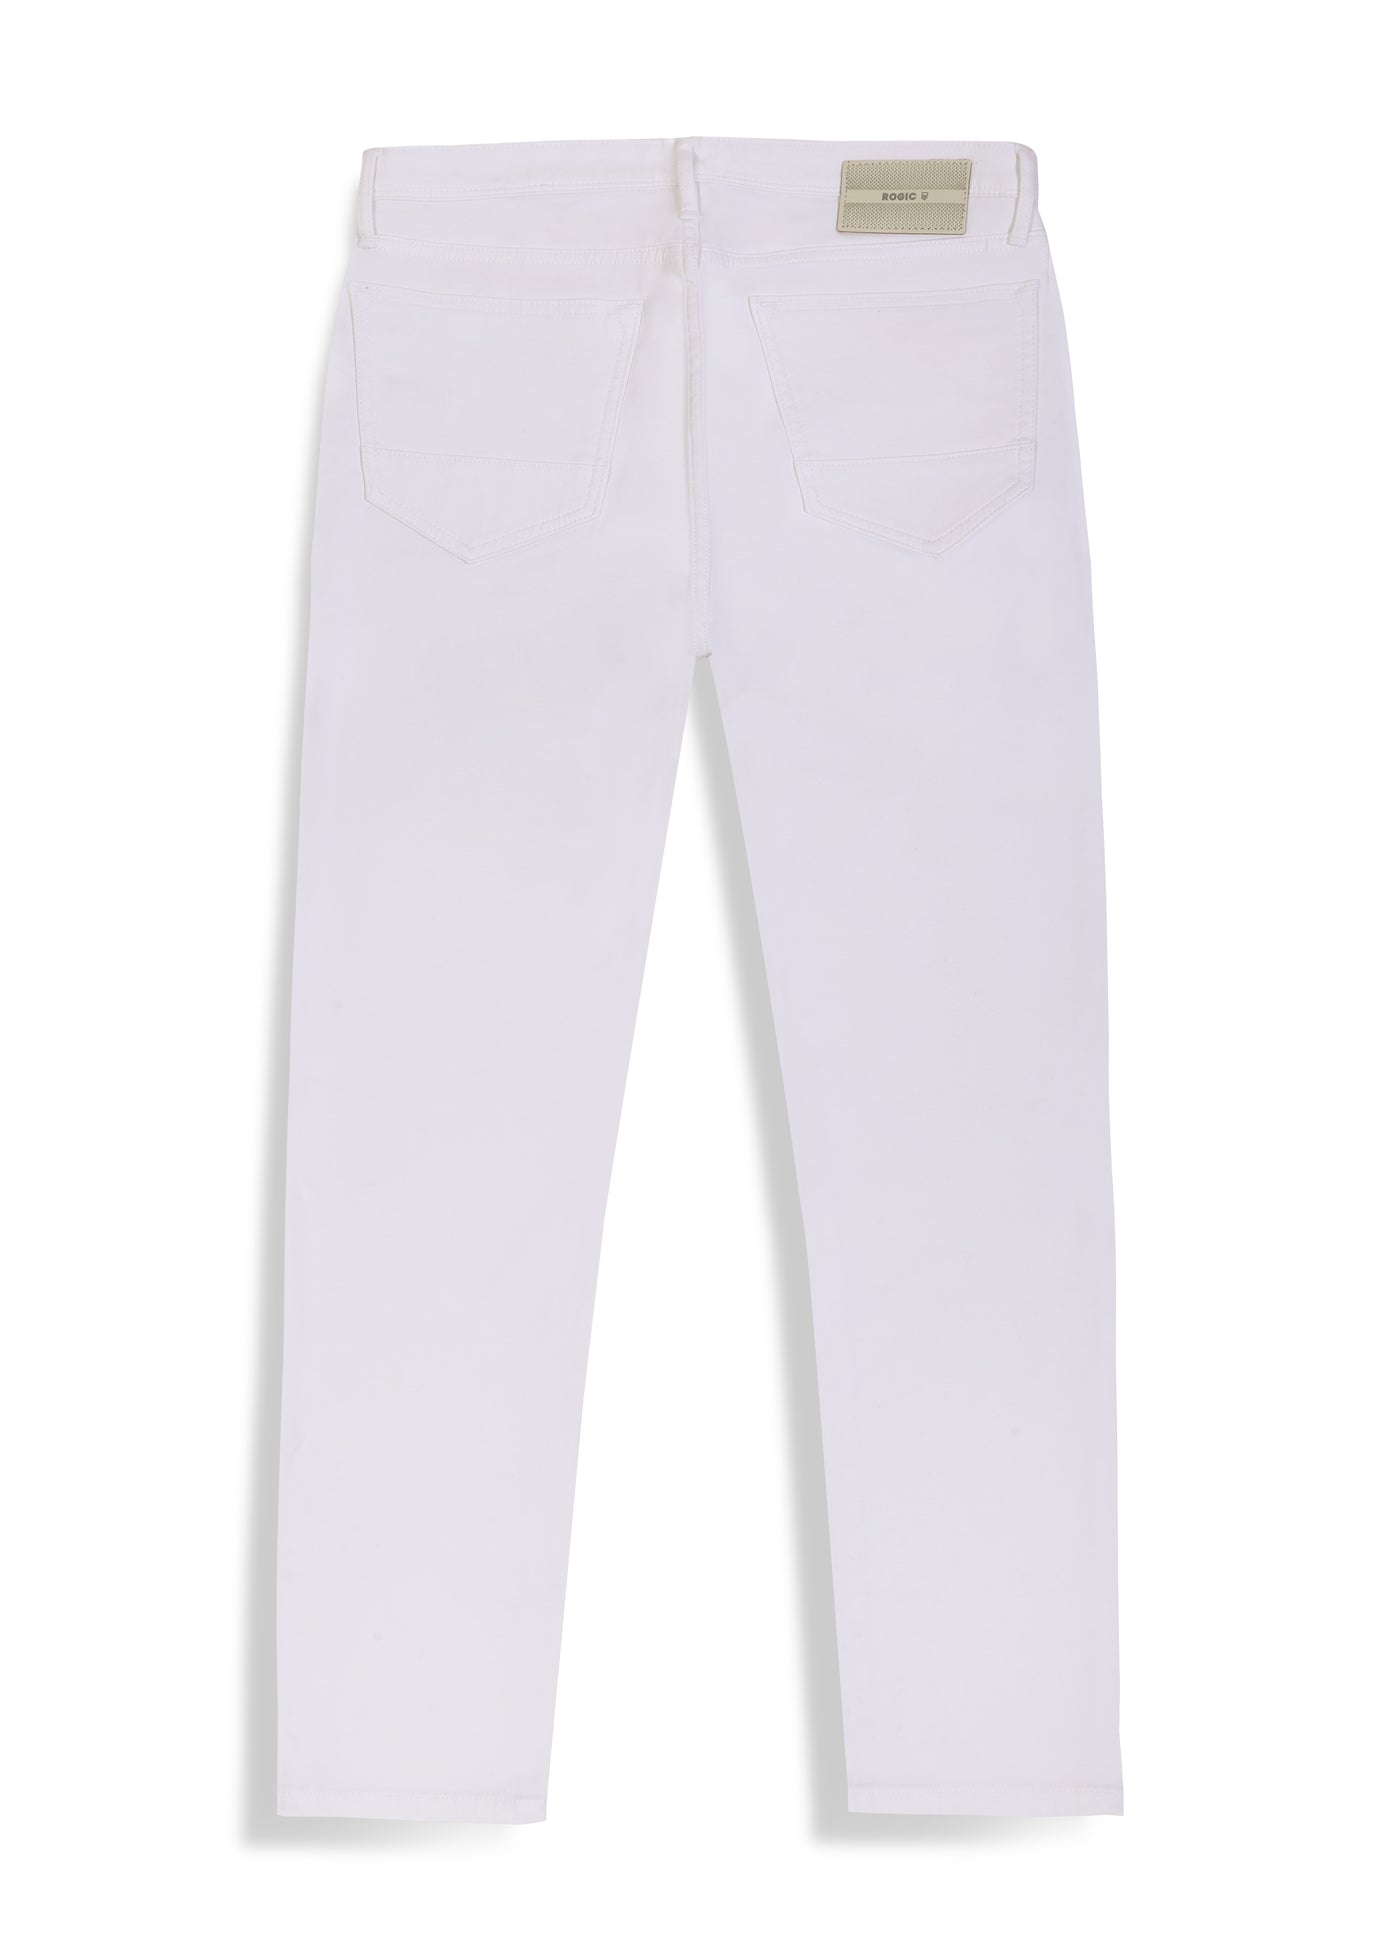 CARTER JEANS <br> IN COTTON WHITE